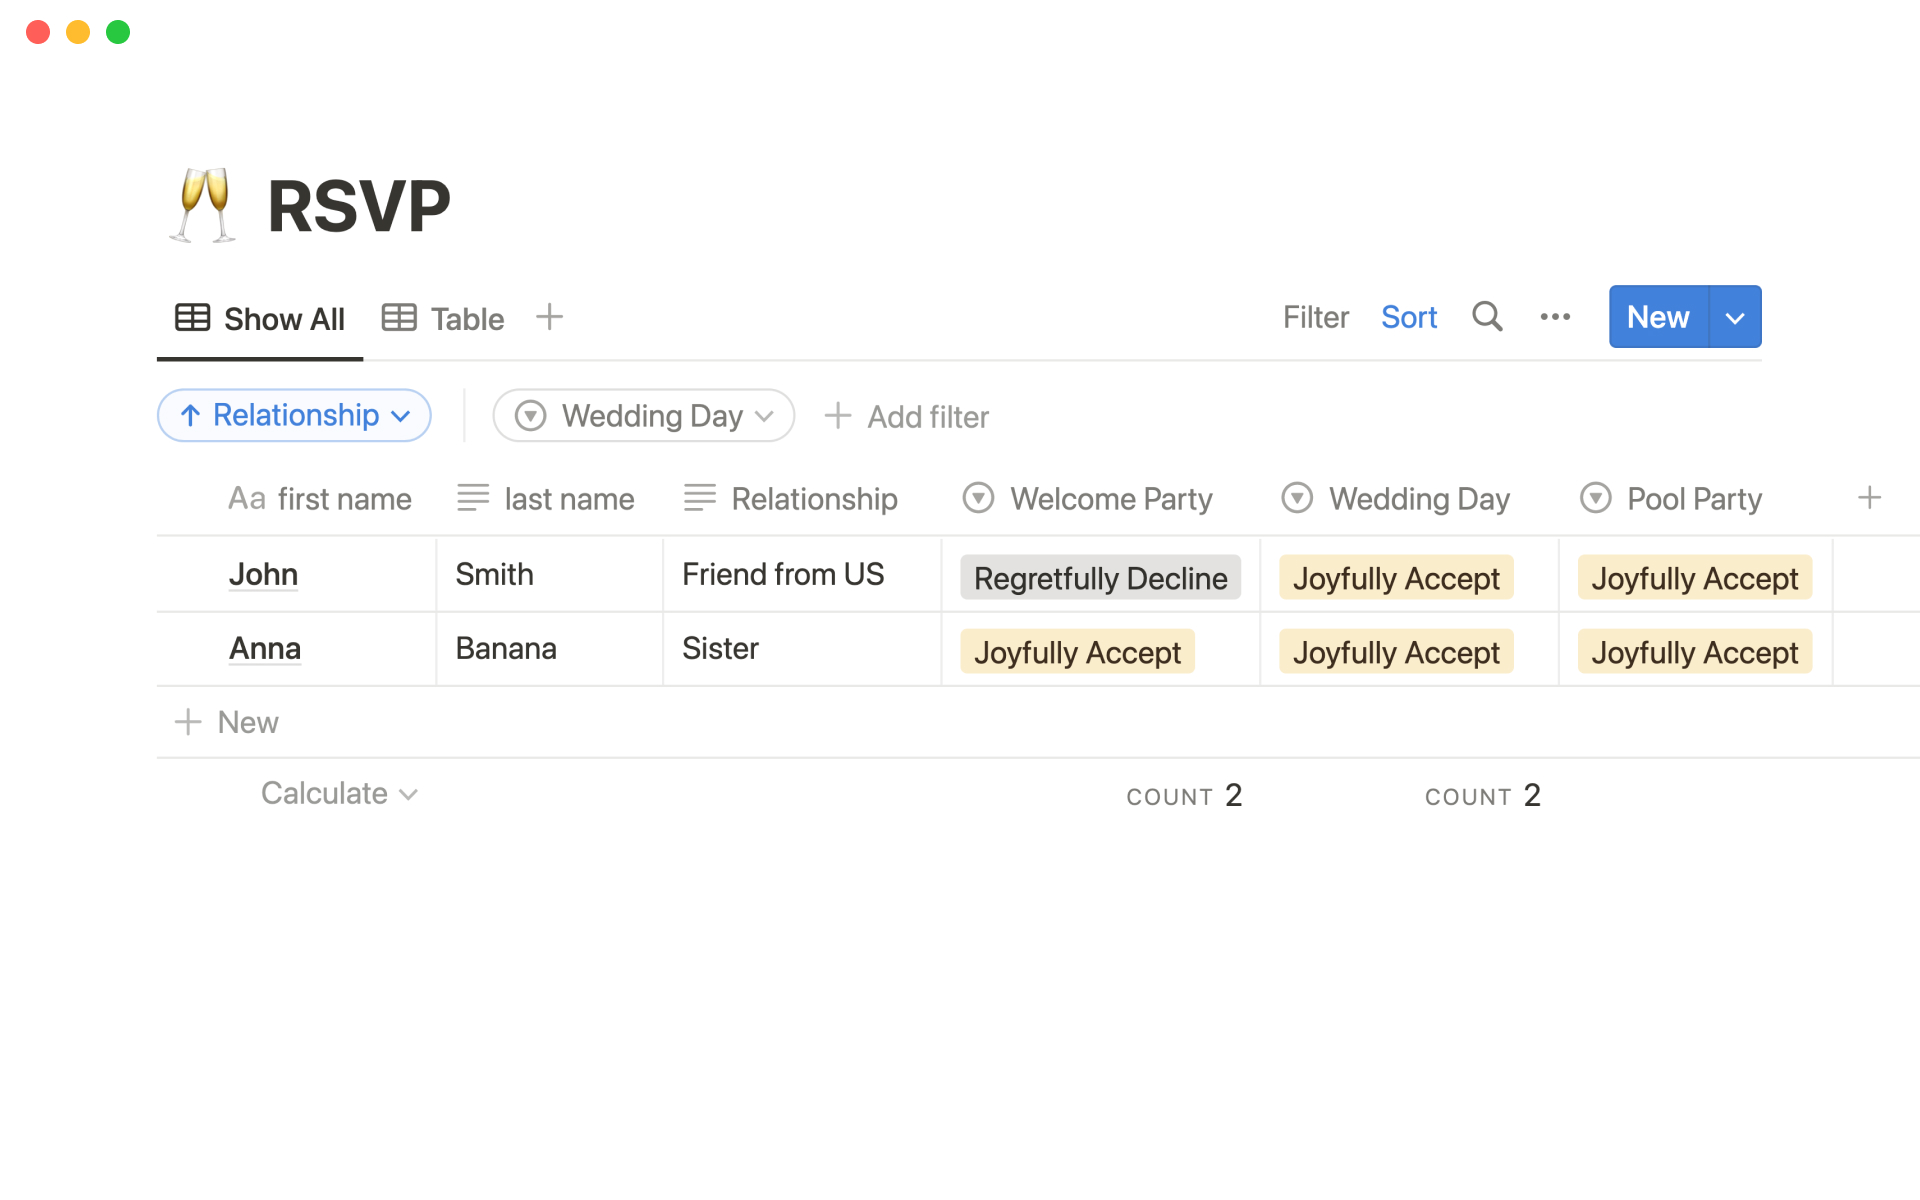 Simple, one page template to plan a wedding locally or overseas.